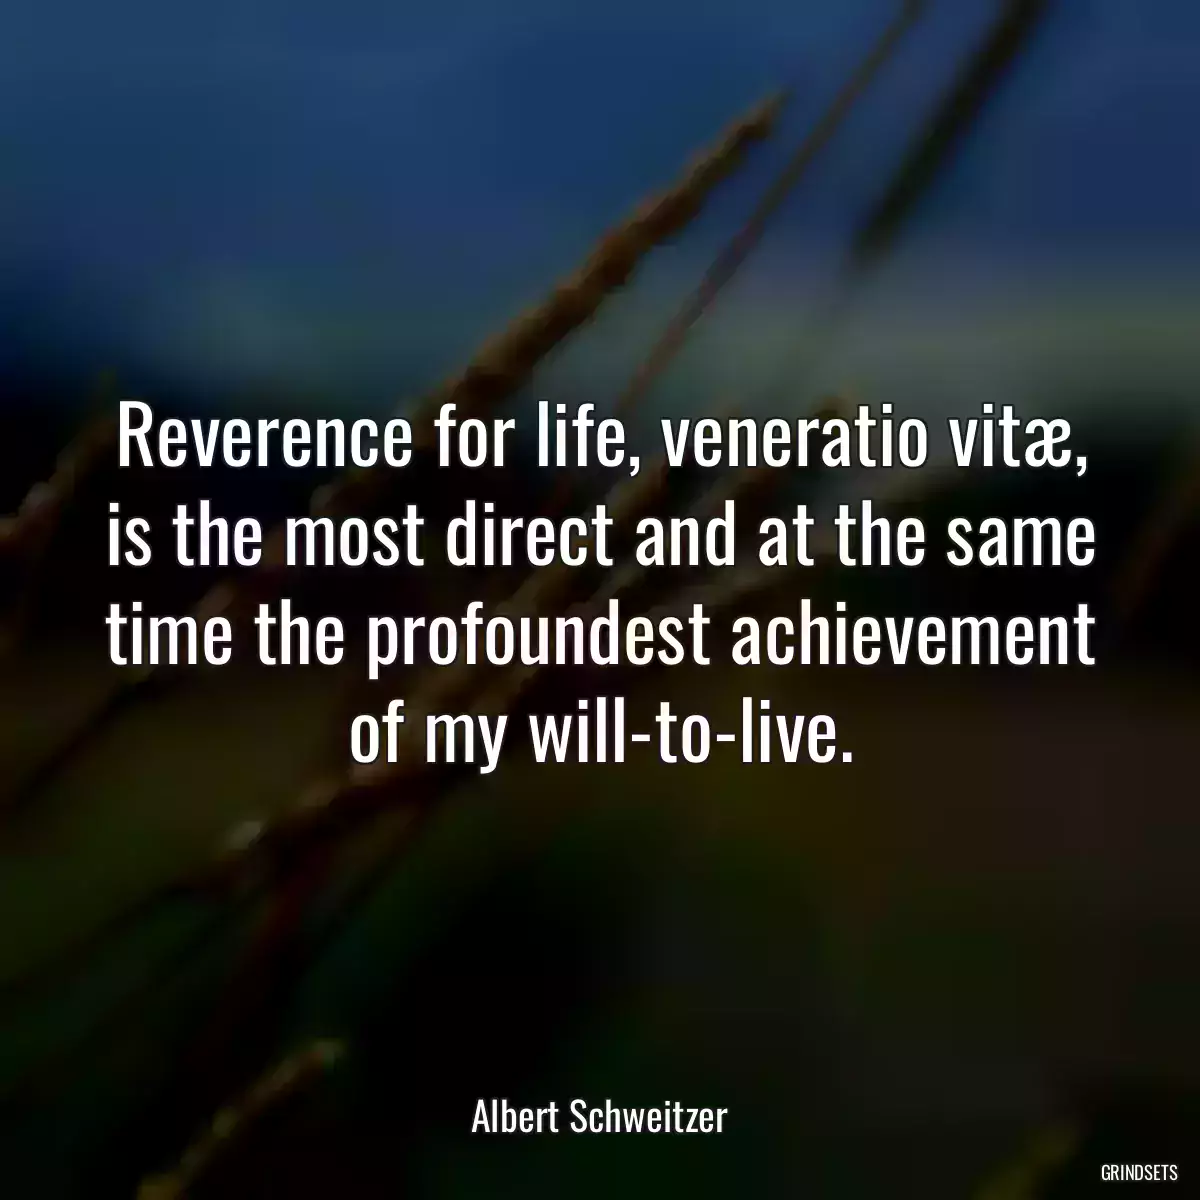 Reverence for life, veneratio vitæ, is the most direct and at the same time the profoundest achievement of my will-to-live.